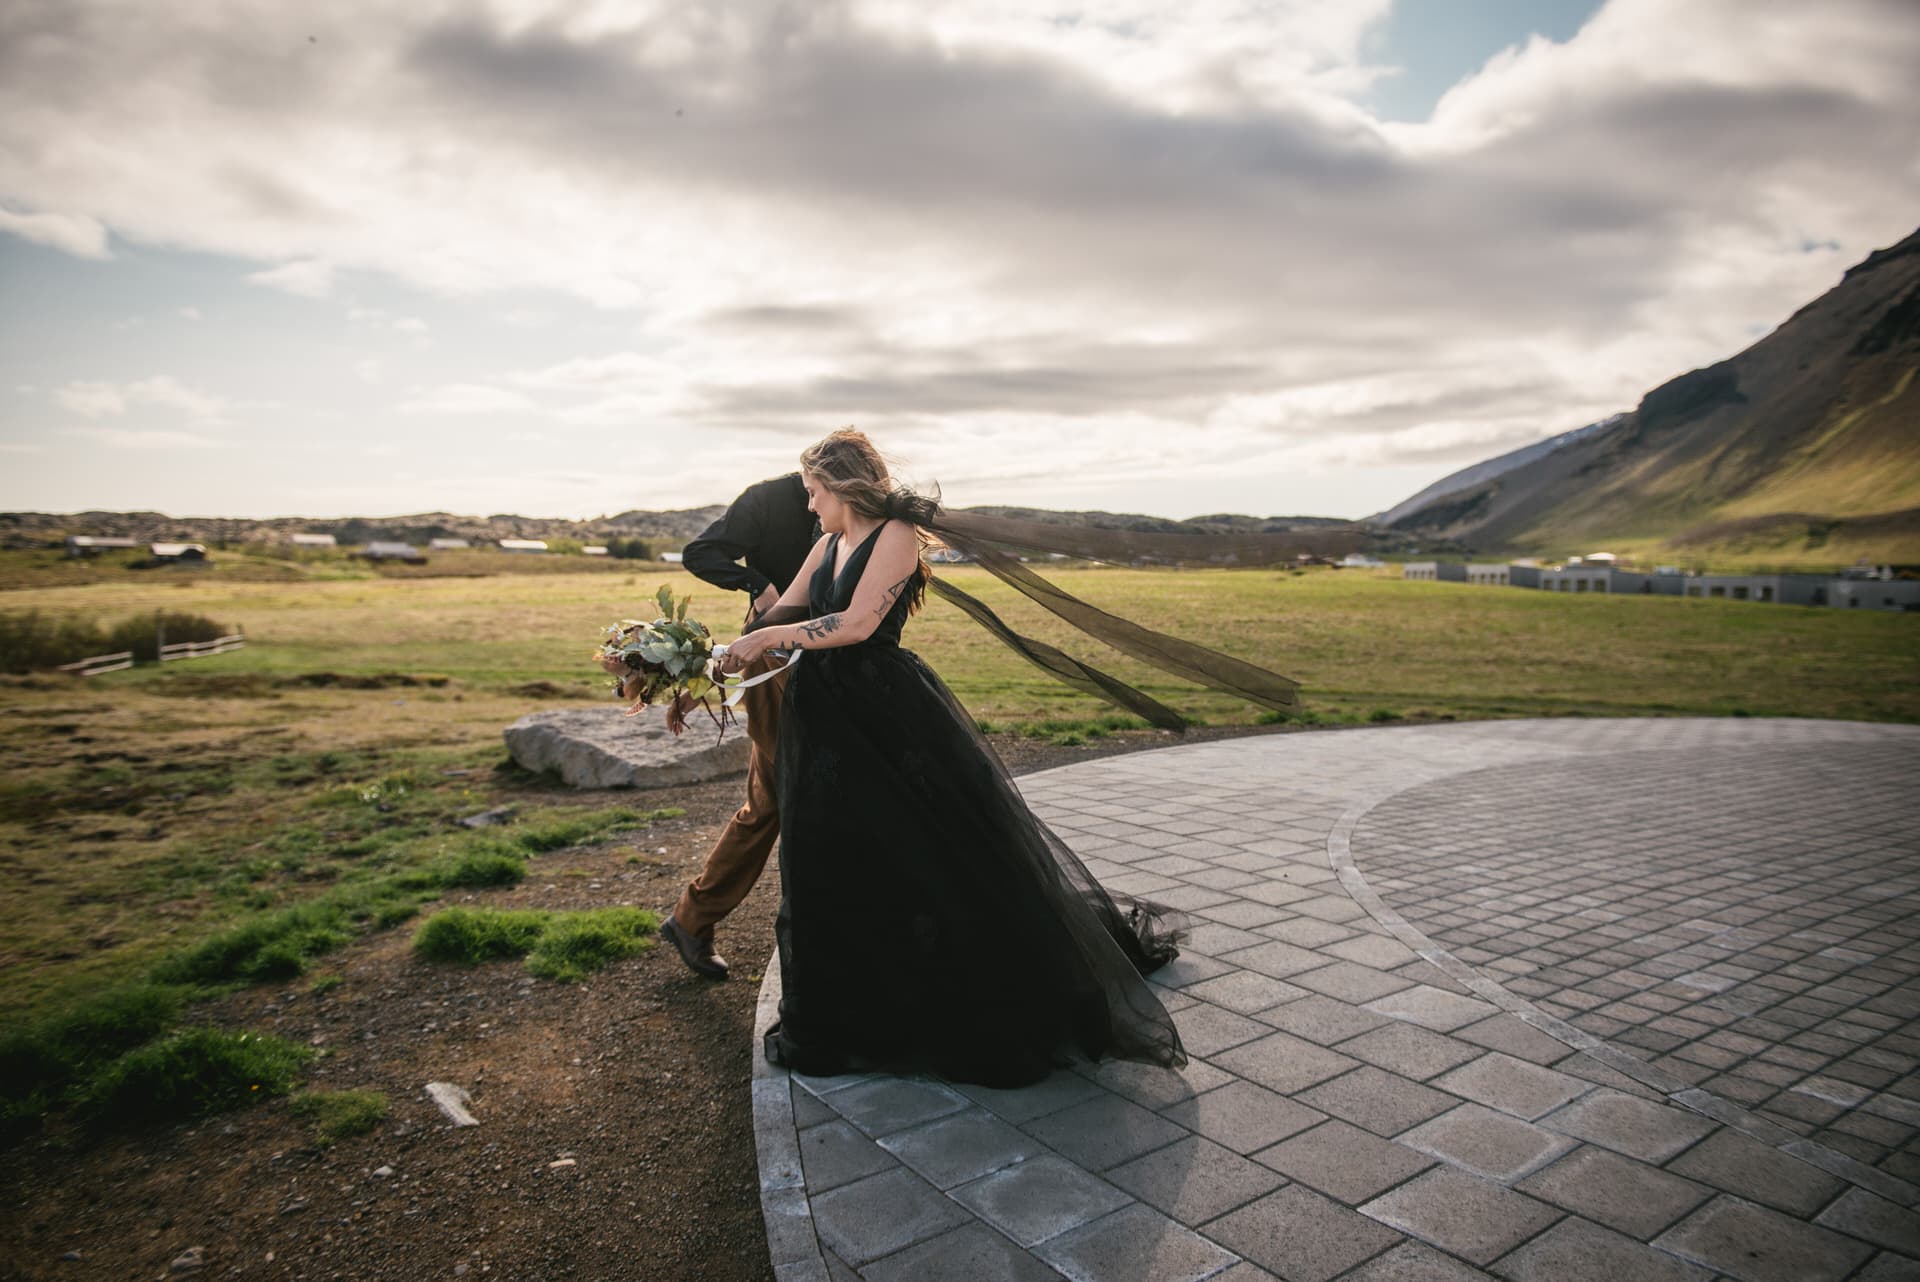 Bride's intricate lace dress stands out against the untamed landscape of the Westfjords.